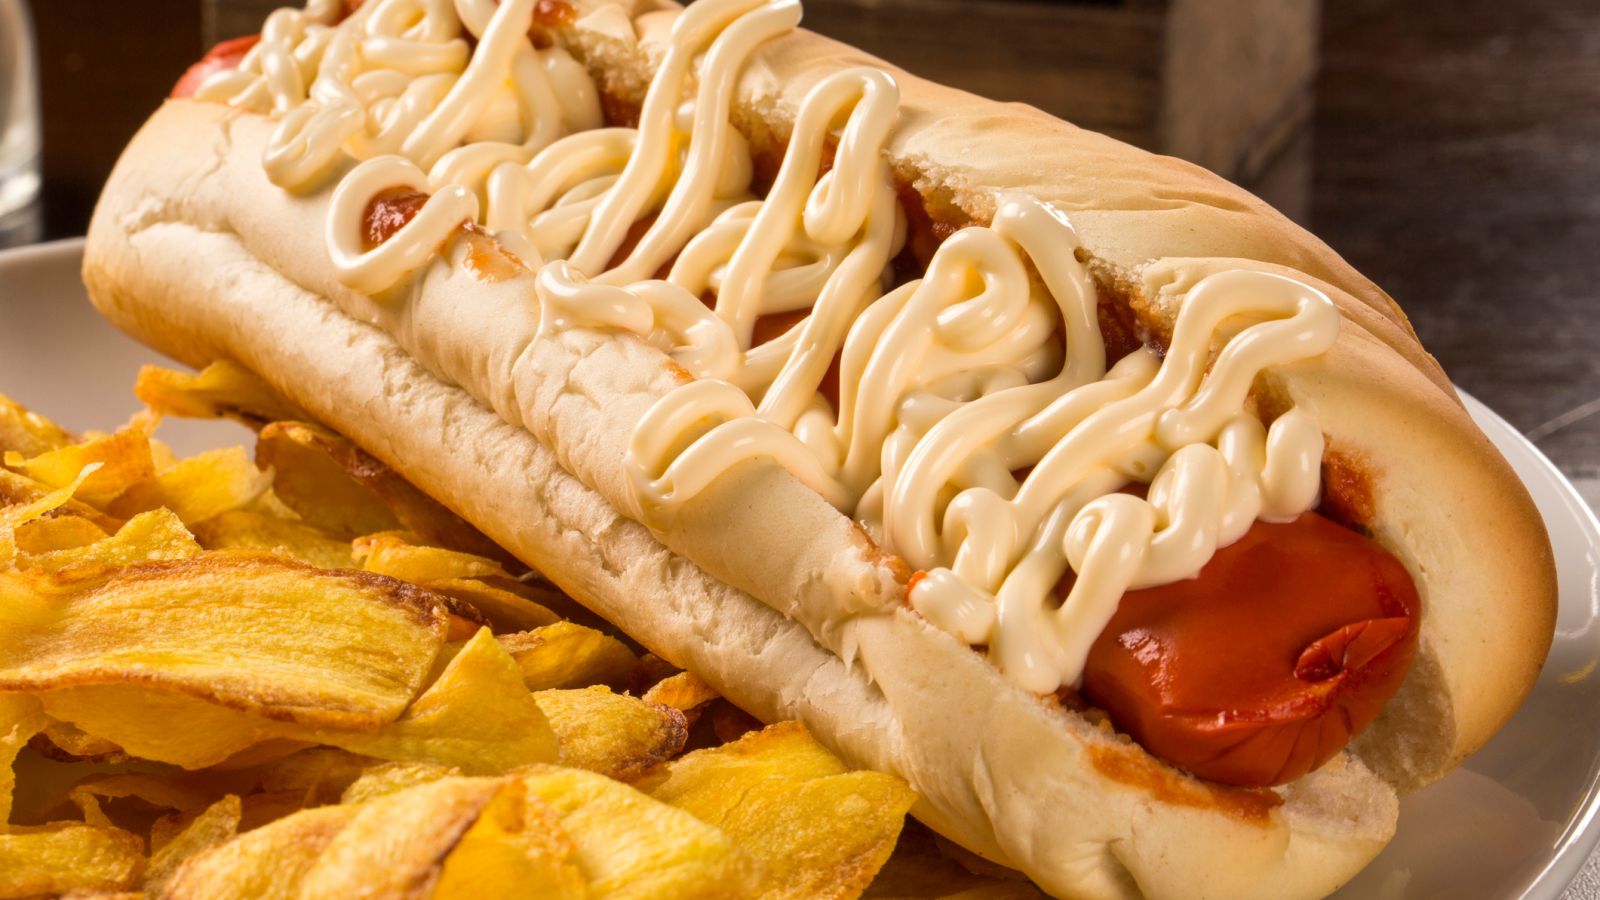 How Many of These Foods Would You Eat With Mayonnaise? Hot Dog With Mayonnaise